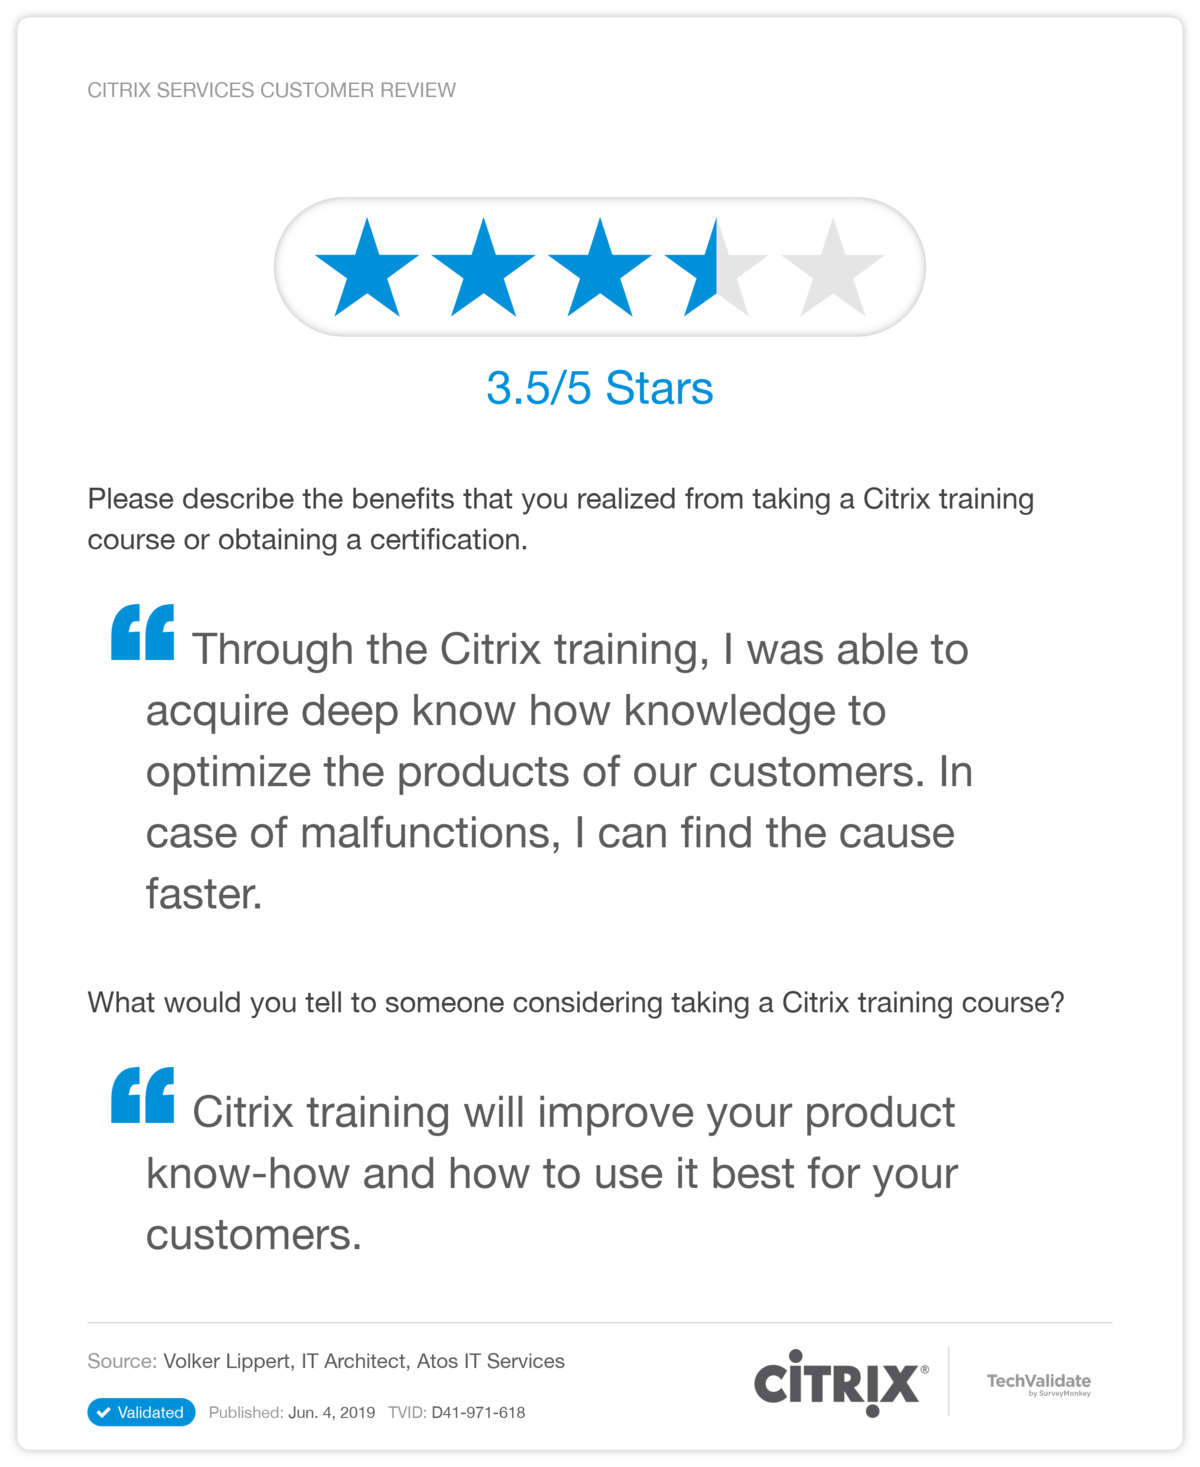 Citrix Services Customer Review